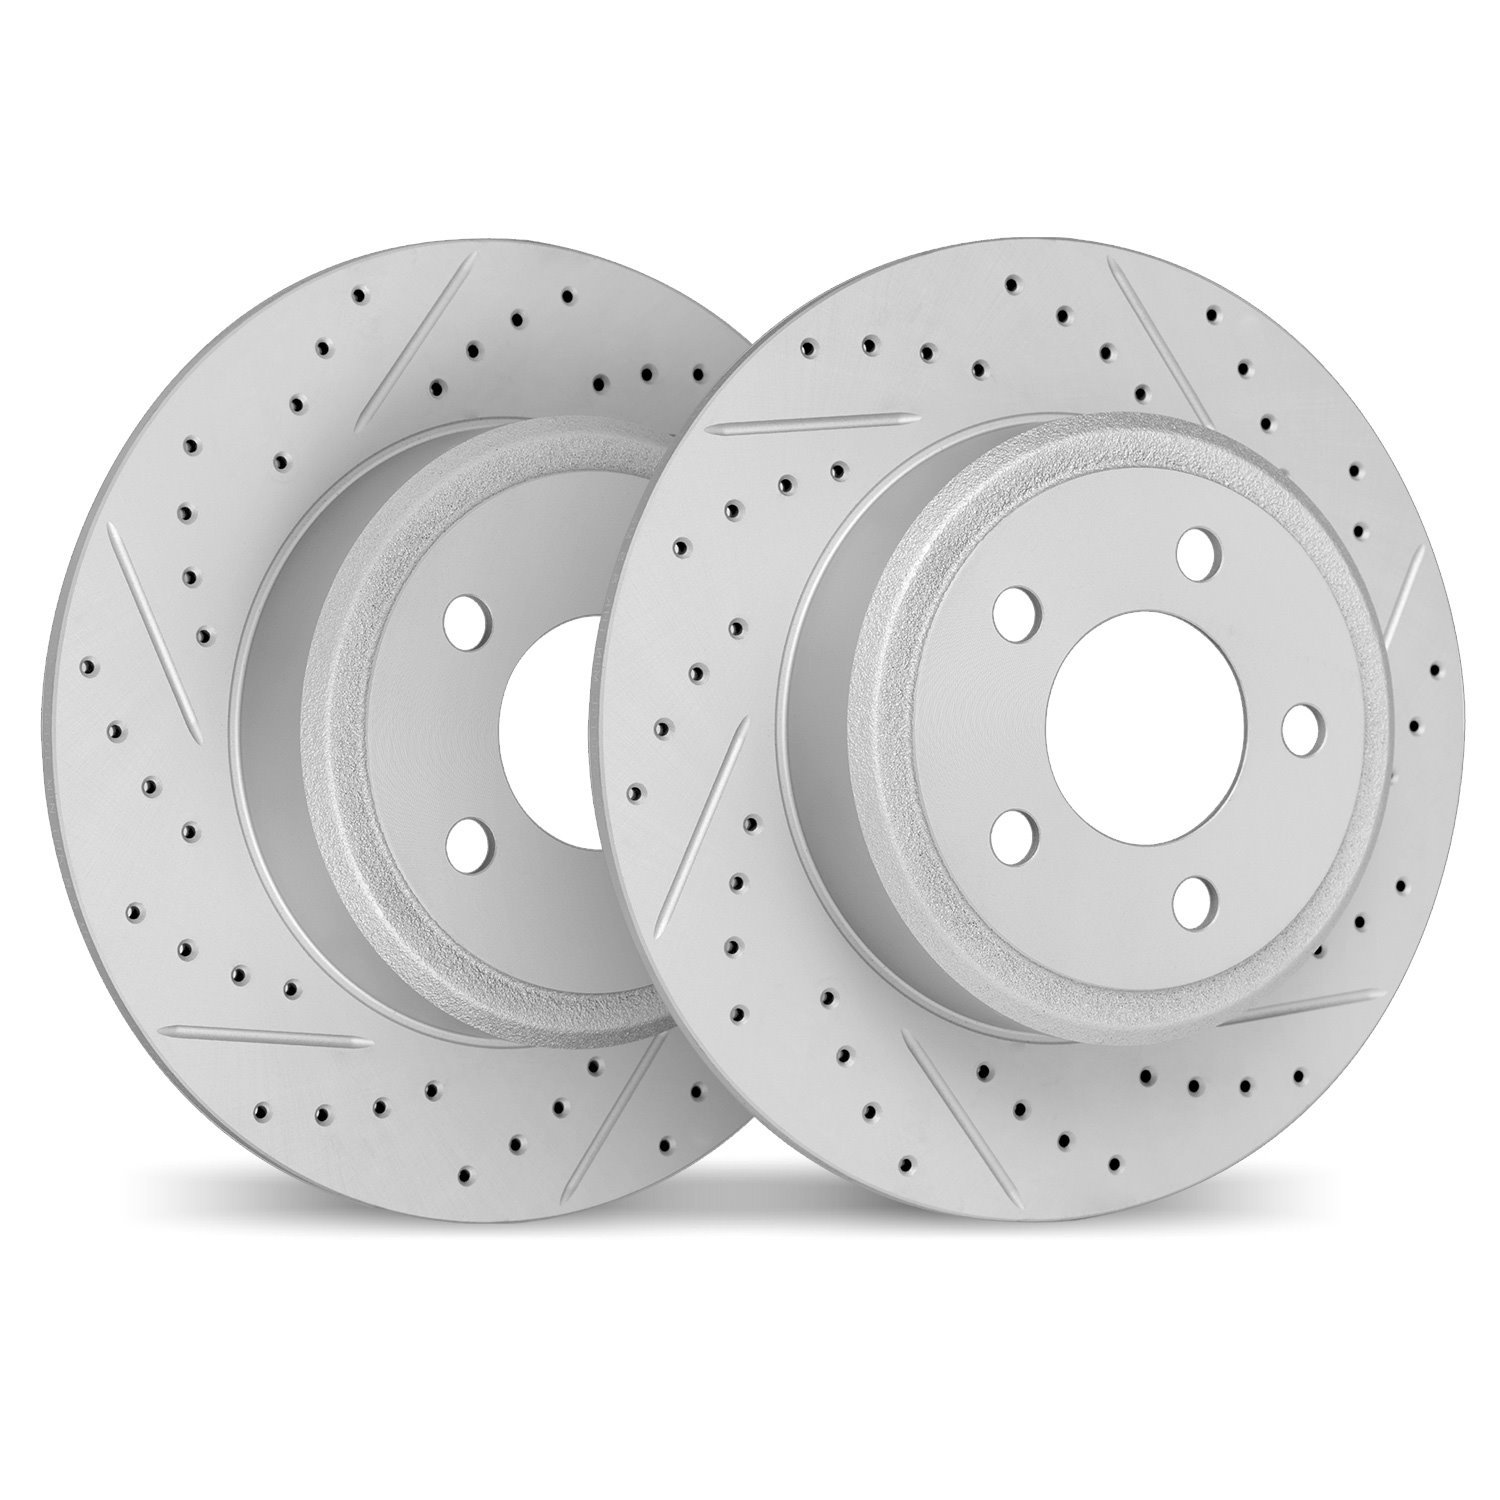 2002-11018 Geoperformance Drilled/Slotted Brake Rotors, 1994-2004 Land Rover, Position: Rear